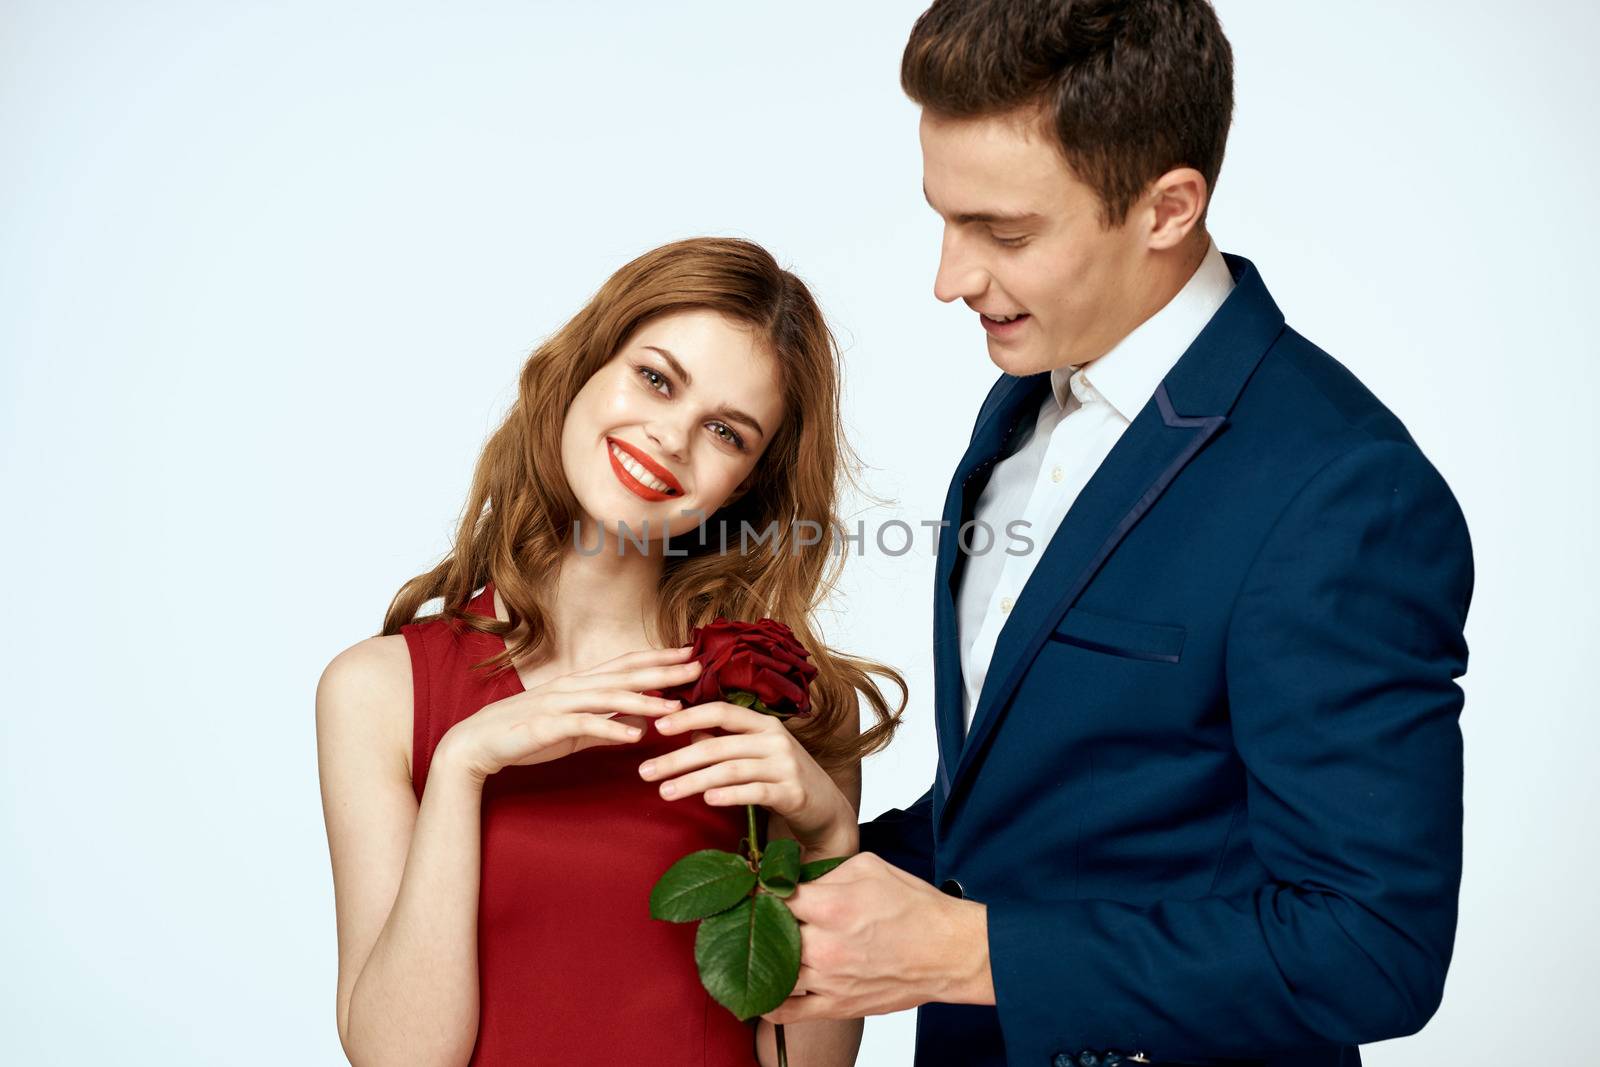 cute man and woman dating relationship red rose lifestyle romance. High quality photo